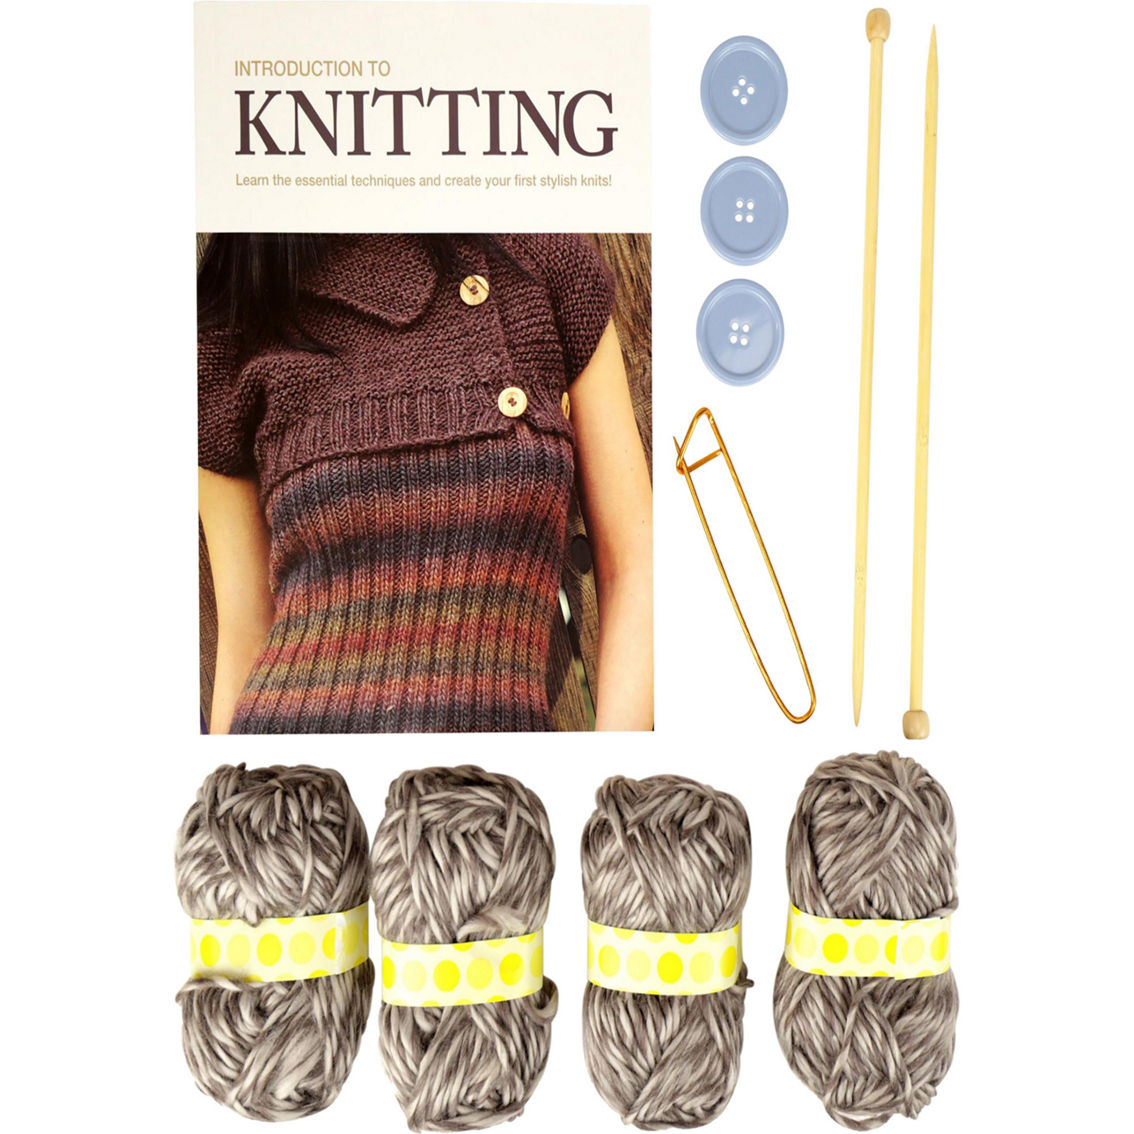 SpiceBox Introduction to Knitting Kit - Image 3 of 3